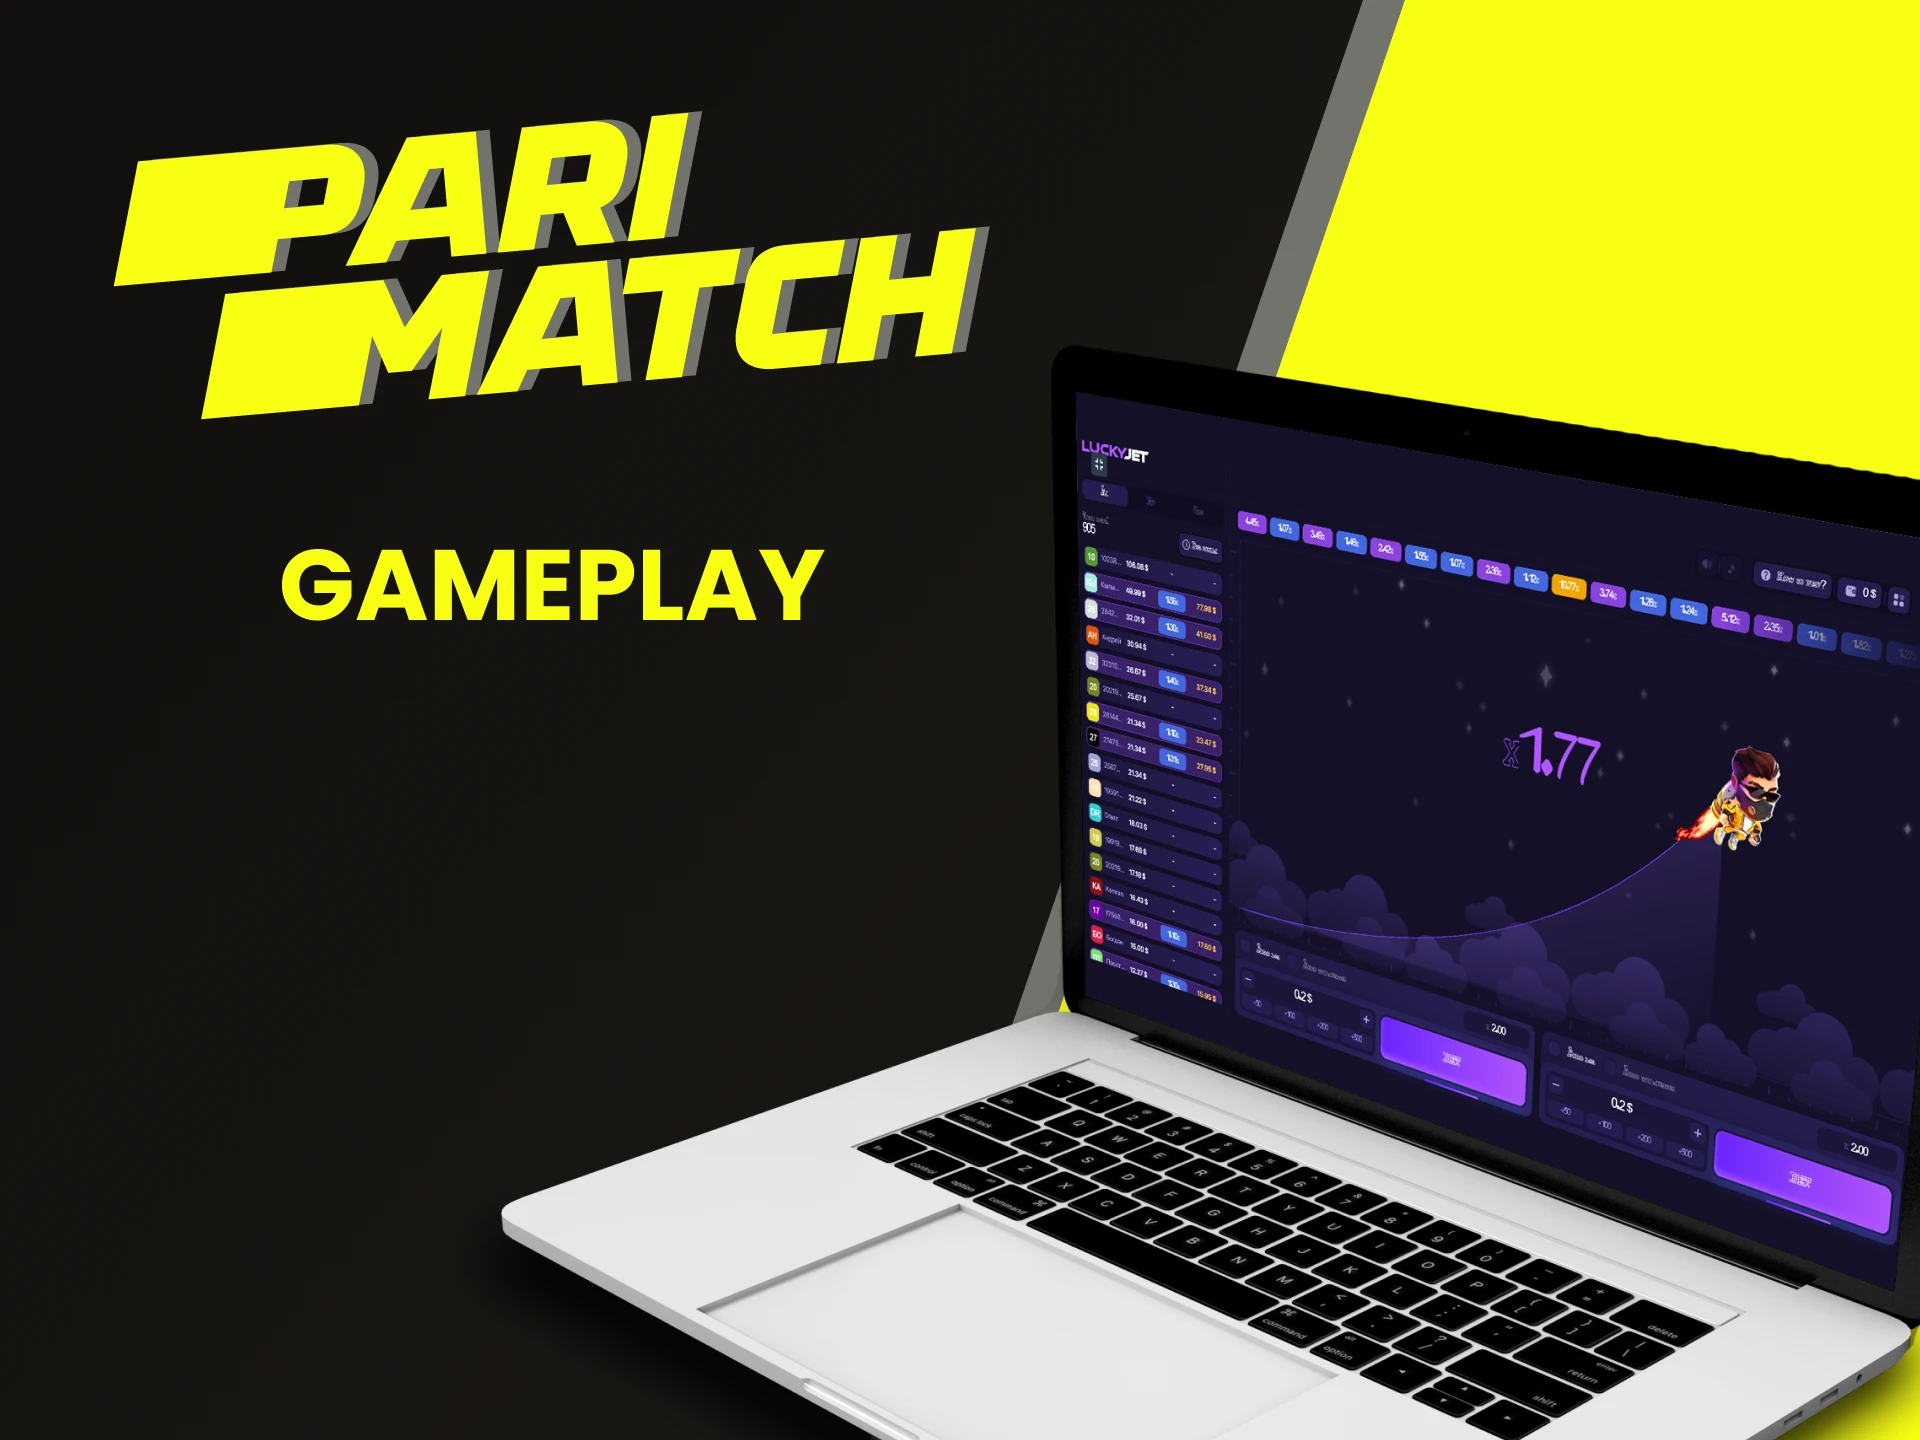 Learn the gameplay of Lucky Jet on Parimatch.